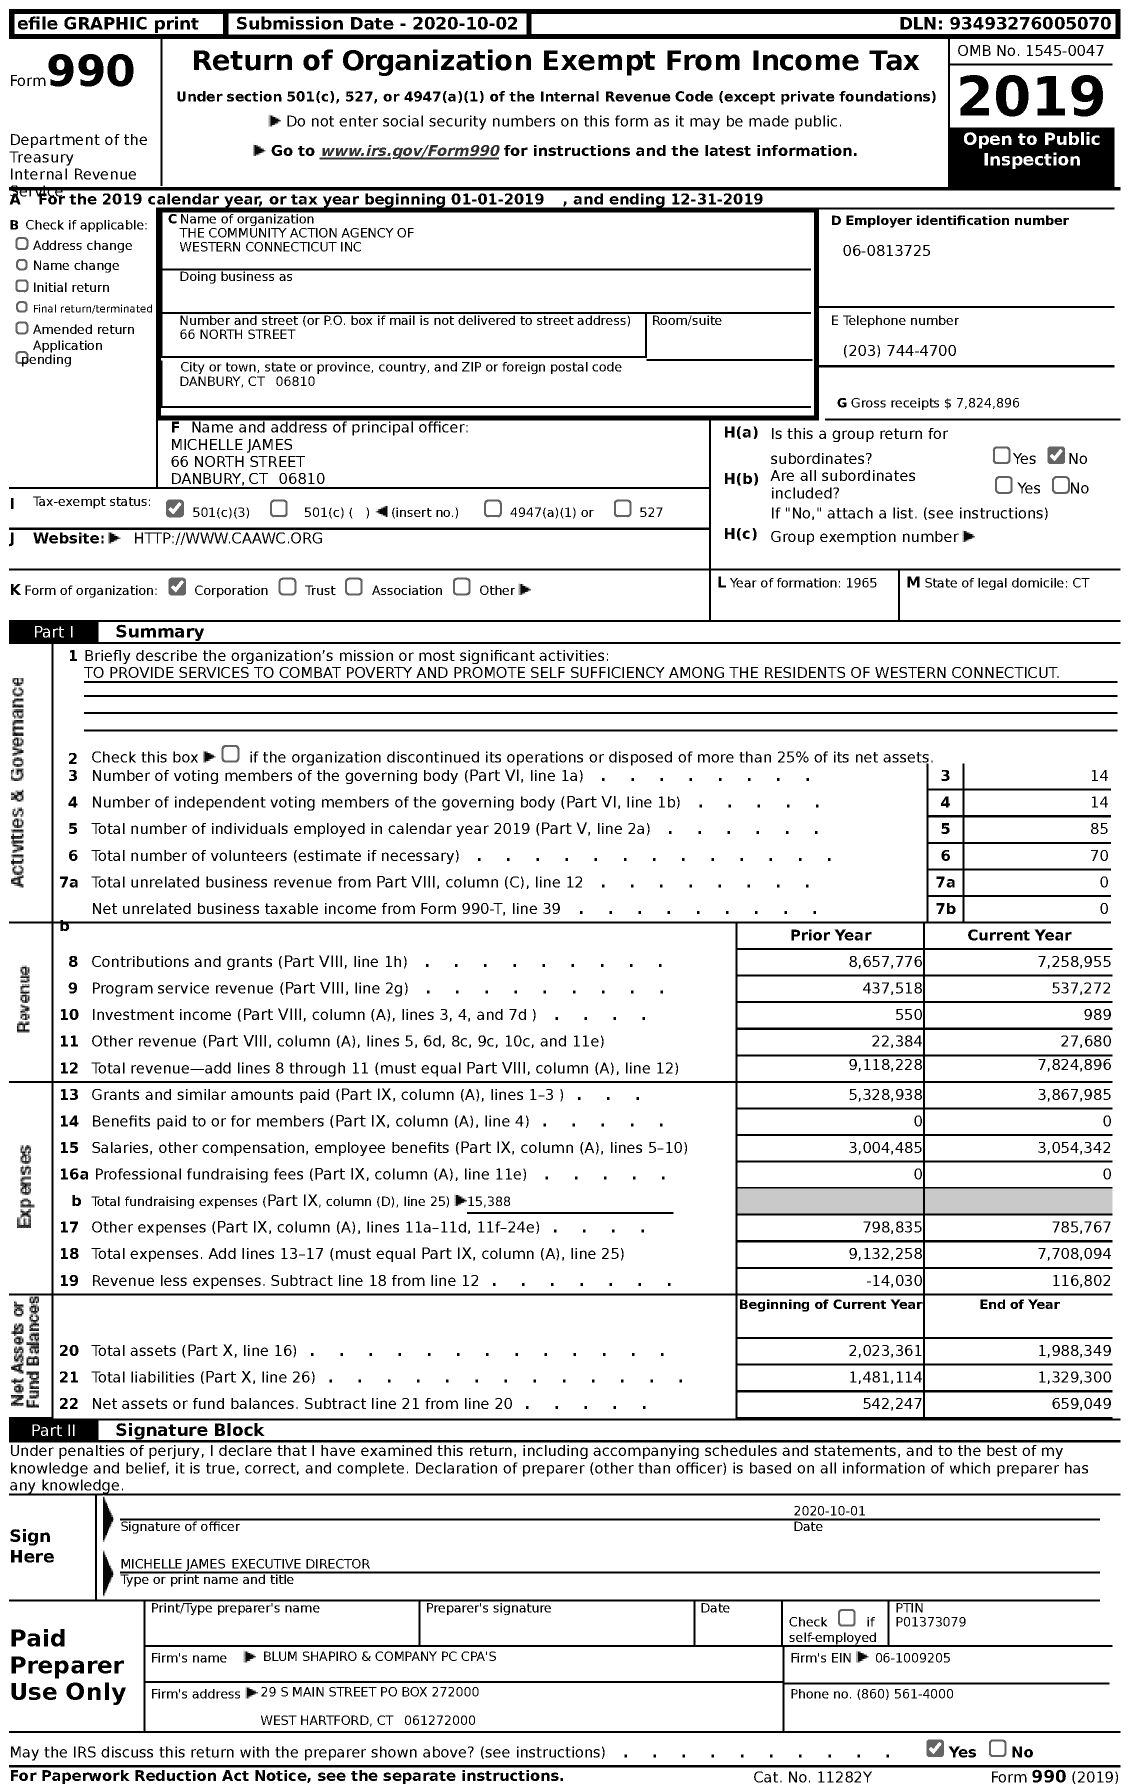 Image of first page of 2019 Form 990 for Community Action Agency of Western Connecticut (CAAWC)